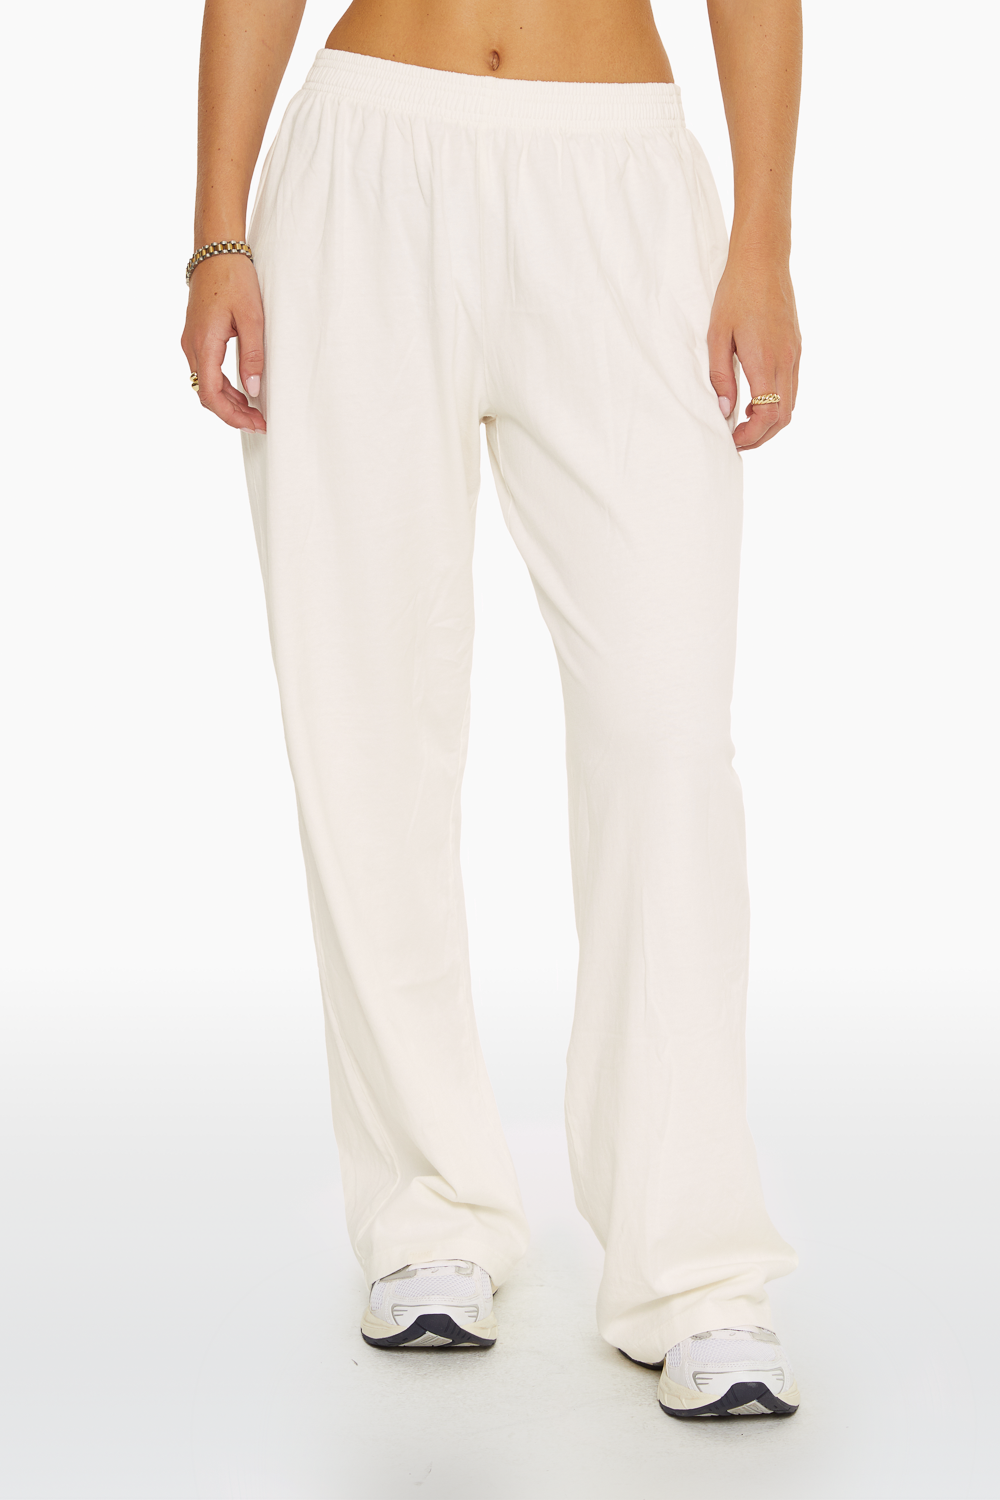 HEAVY COTTON EASY PANTS - BLANC Featured Image